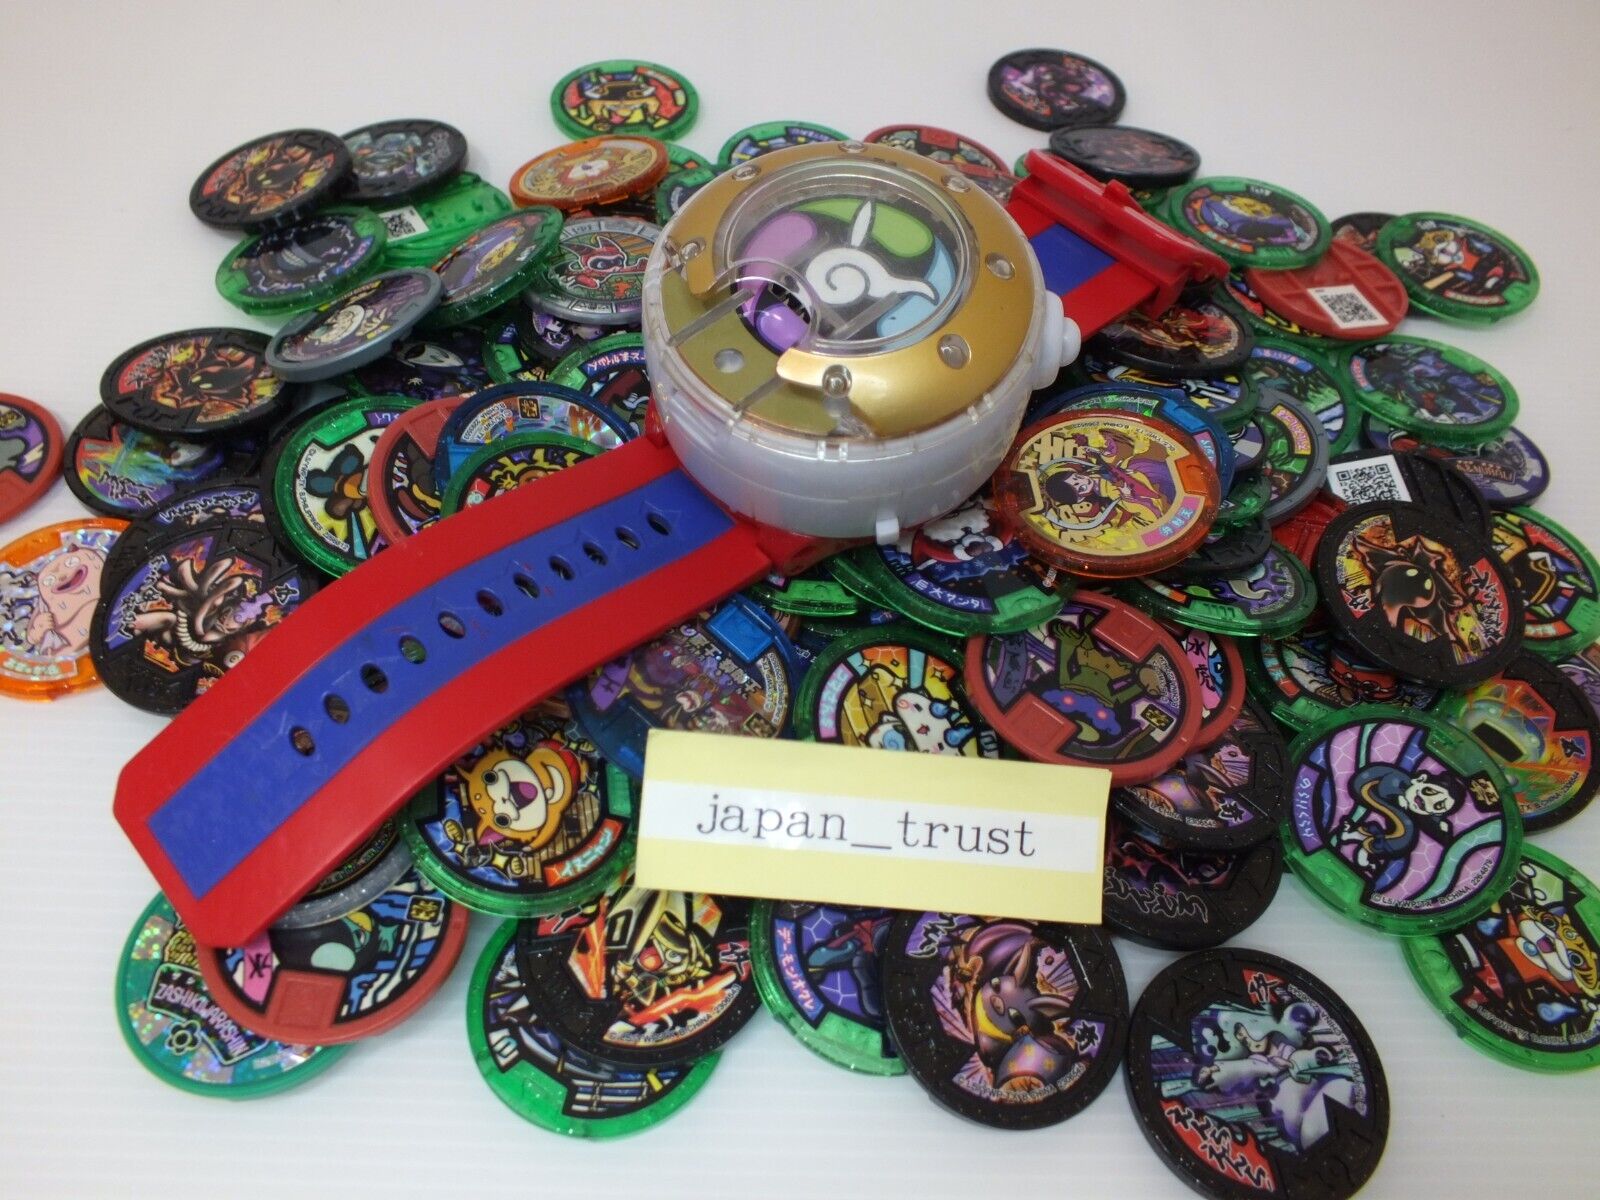 DX Yokai Watch Dream Updated to version 5 and Medal Set of 130 medals (random)